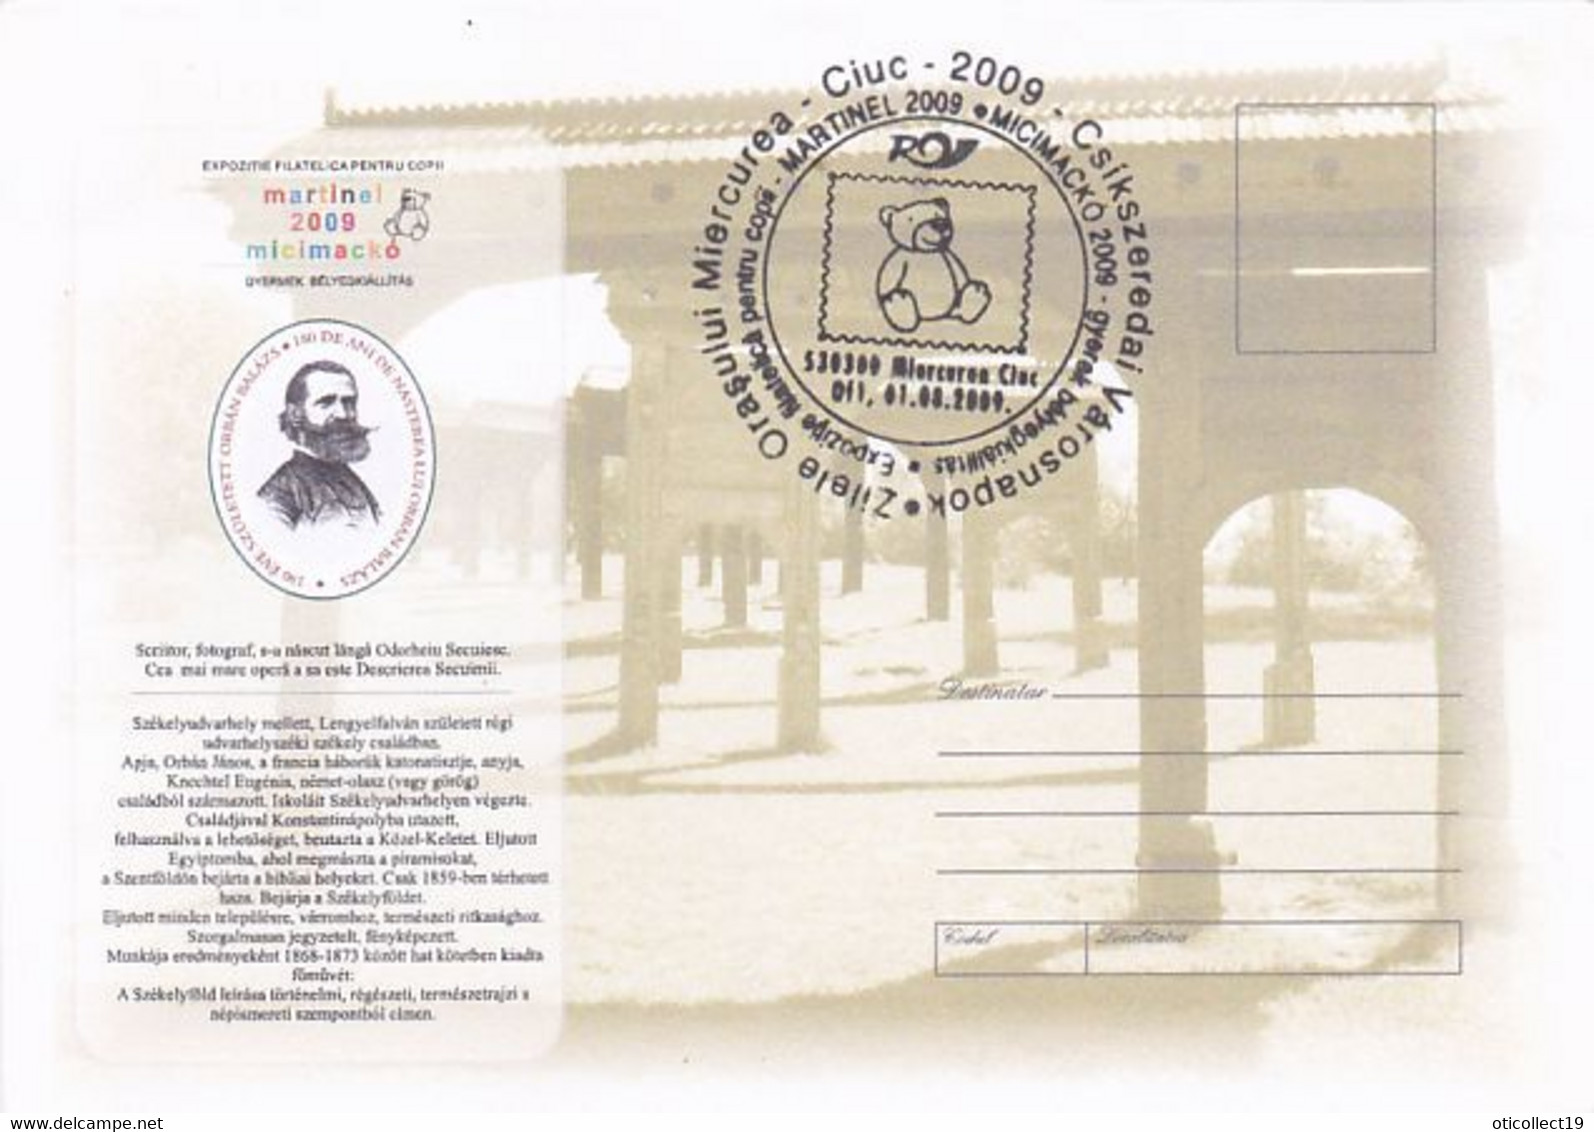 ORBAN BALAZS, WRITER, MARTINEL CHILDRENS PHILATELIC EXHIBITION, SPECIAL COVER, 2009, ROMANIA - Lettres & Documents